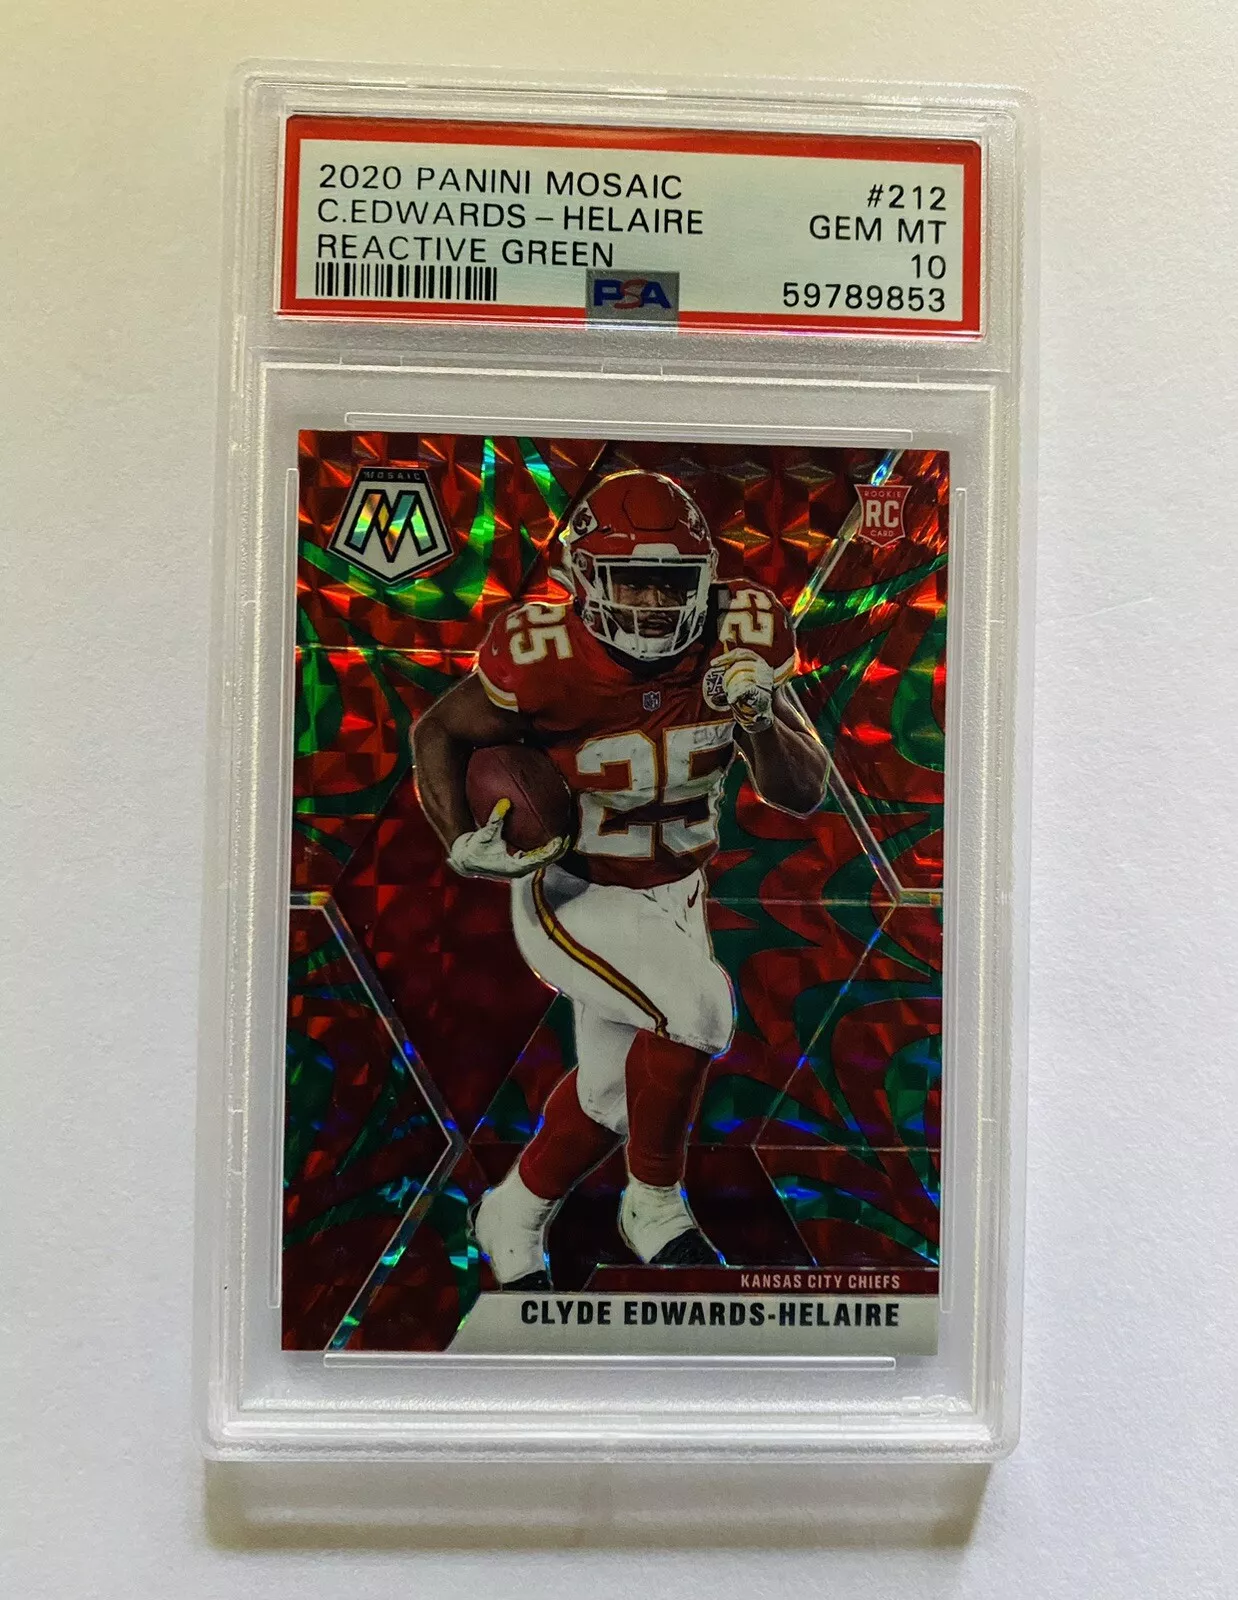 2020 Panini Mosaic Clyde Edwards-Helaire Reactive Green PSA 10 Rookie RC Chiefs